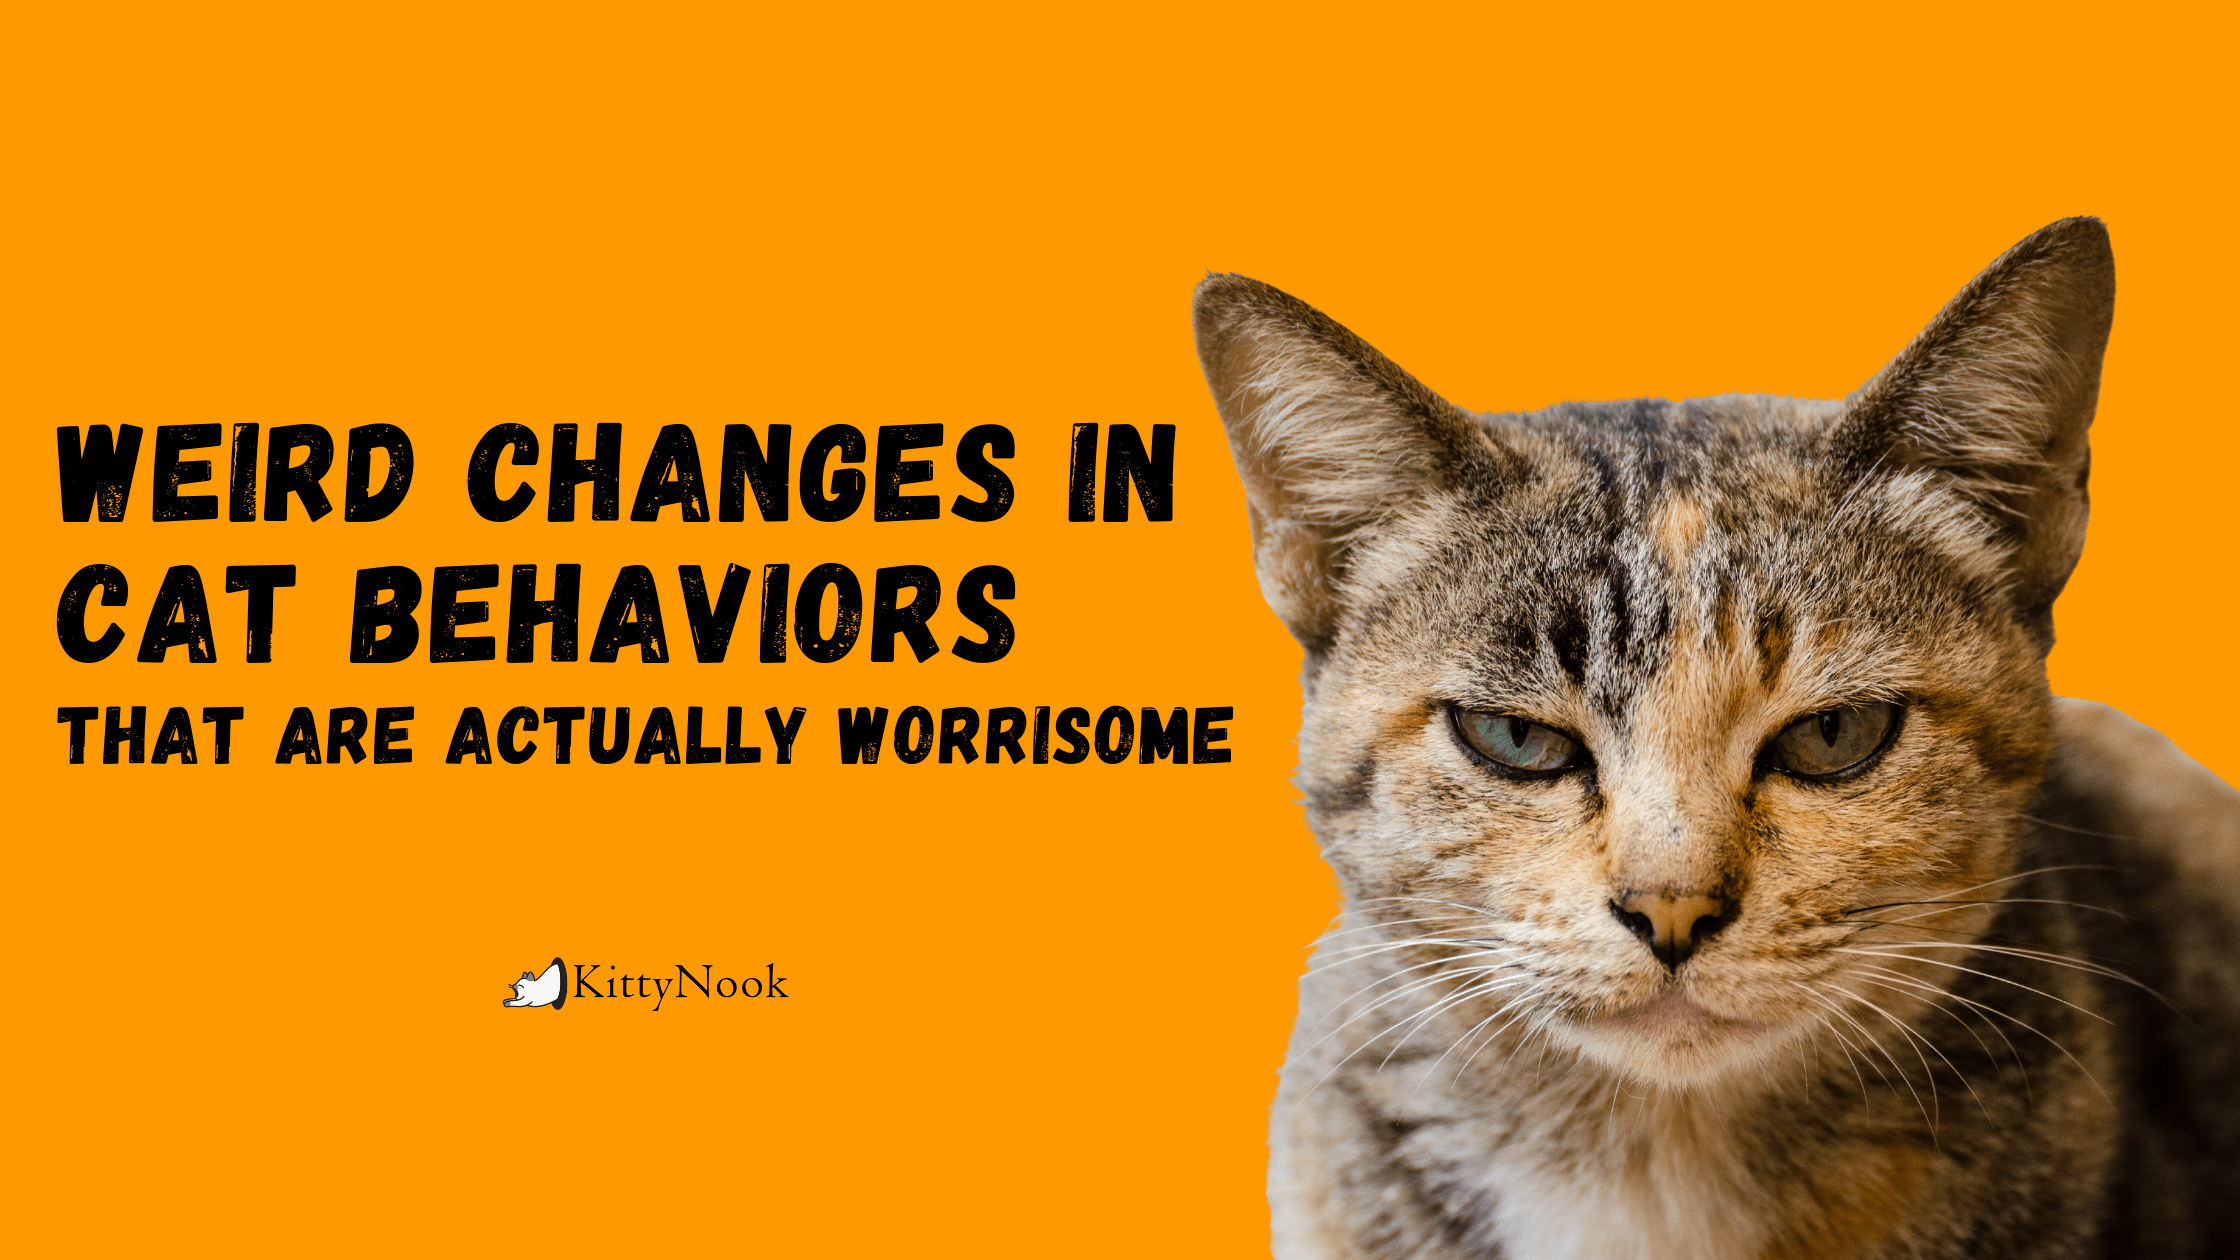 cat grunting on a yellow background with text saying weird changes in cat behaviors